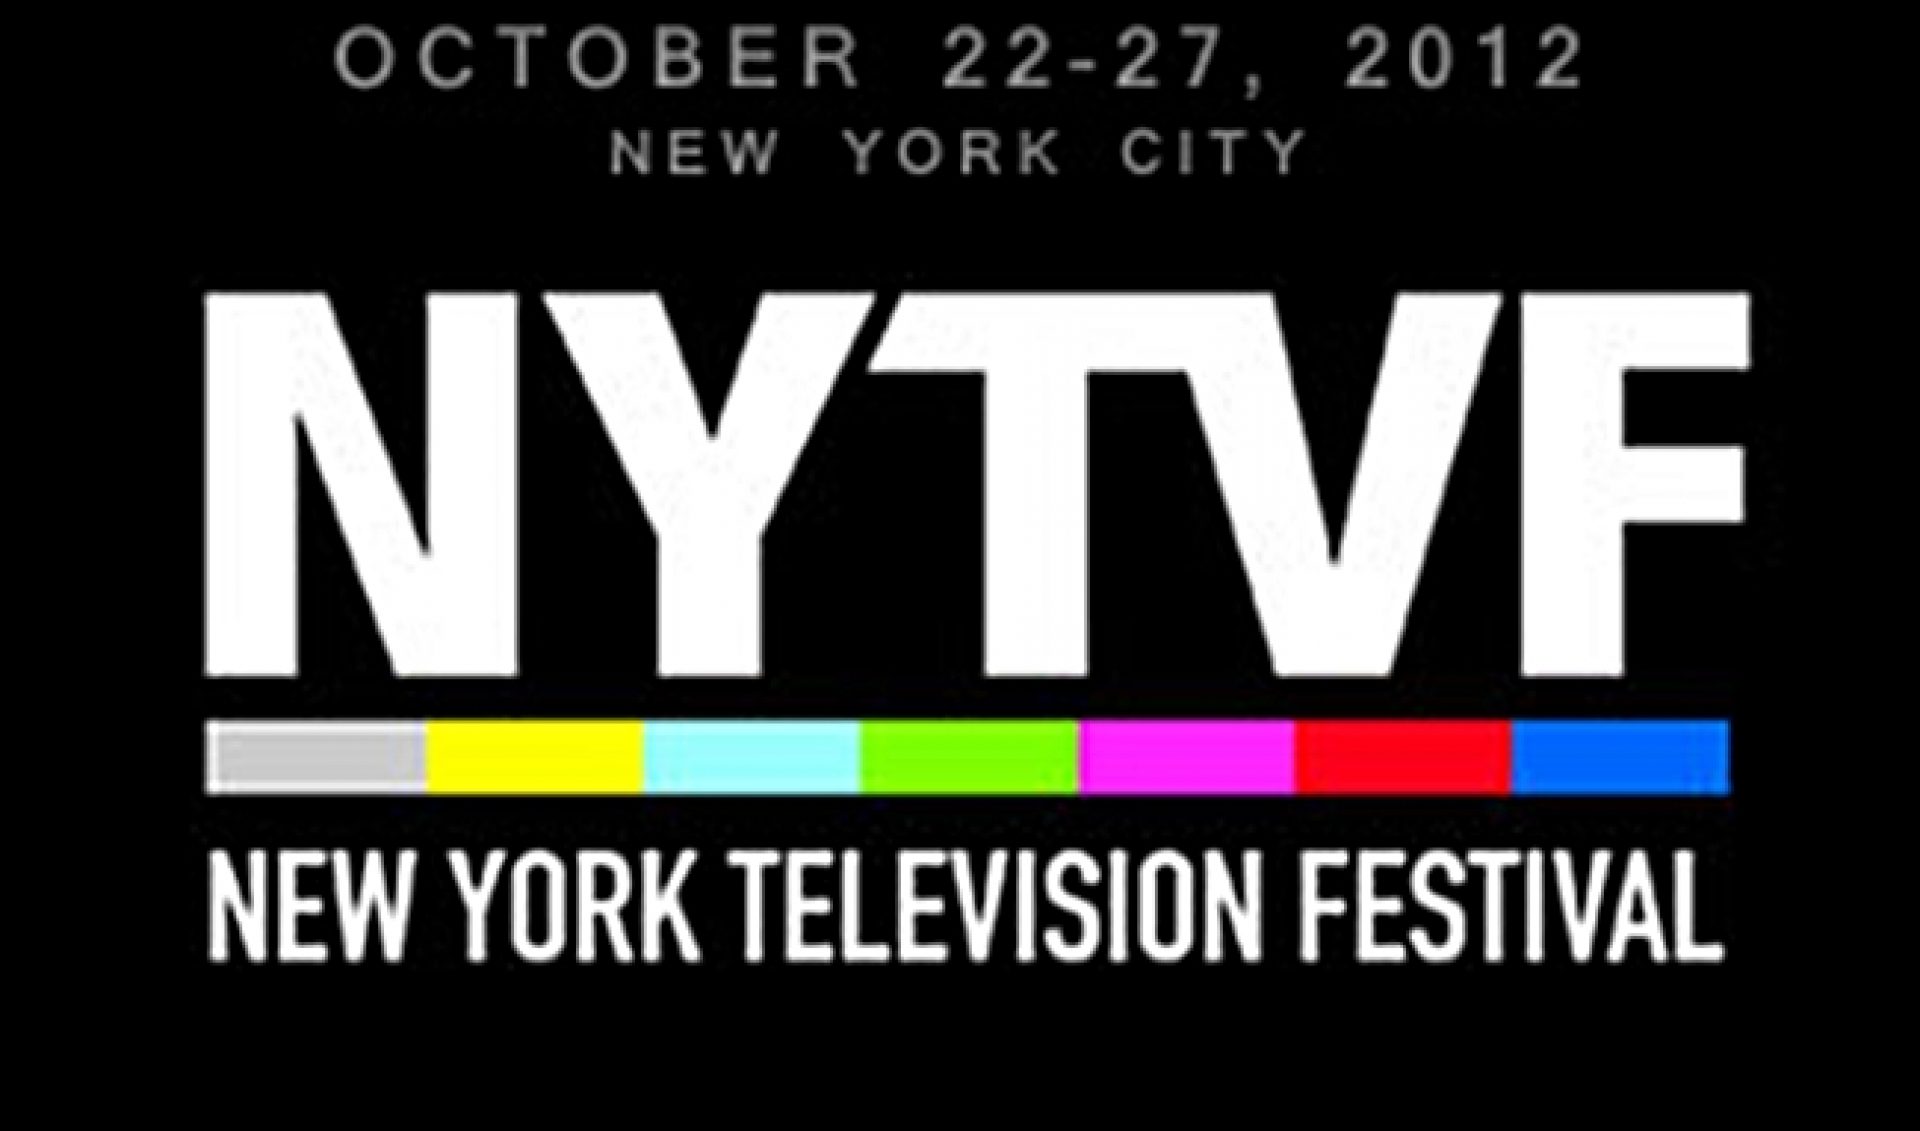 NYTVF Digital Day To Feature Interactive Event (with $300K at Stake)